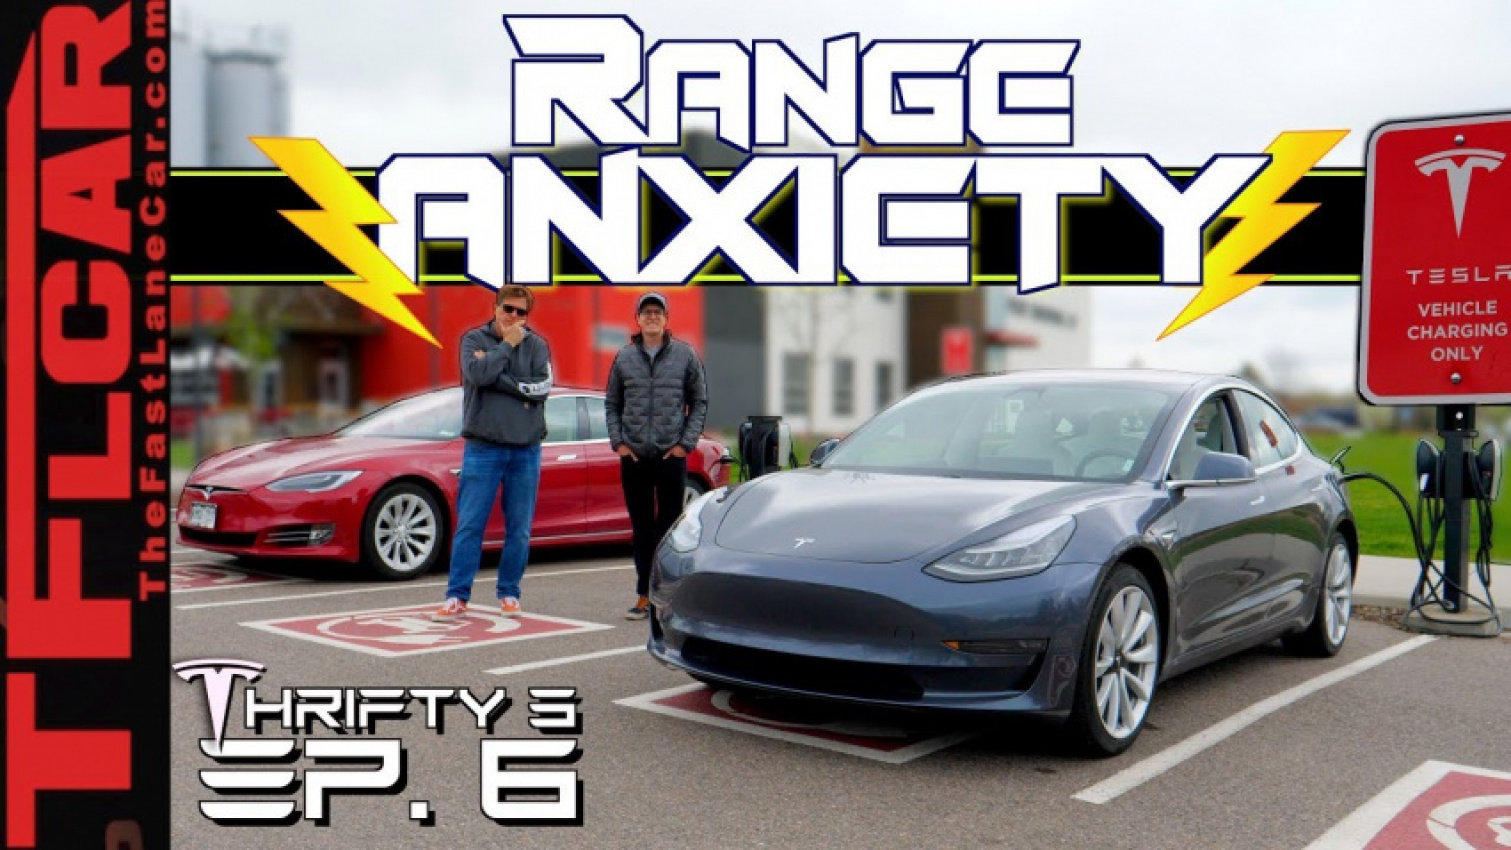 autos, cars, tesla, accident, cost of owning a tesla, long range, model 3, model 3 review, model s, model x, model y, range anxiety, repair, telsa model 3 review, tesla model 3, tesla model 3 batery range, tesla model 3 long range, tesla model 3 performance, tesla model 3 price, tesla model 3 range, tesla model 3 range lost, tesla model 3 range test, tesla model 3 review, tesla model 3 standard range plus, tesla model 3 winter range, tesla model s, tesla model x, tflcar, the fast lane car, thrifty 3, does keeping a tesla charged suck? here's what it's like to live with a new model 3! thrifty 3 ep. 6